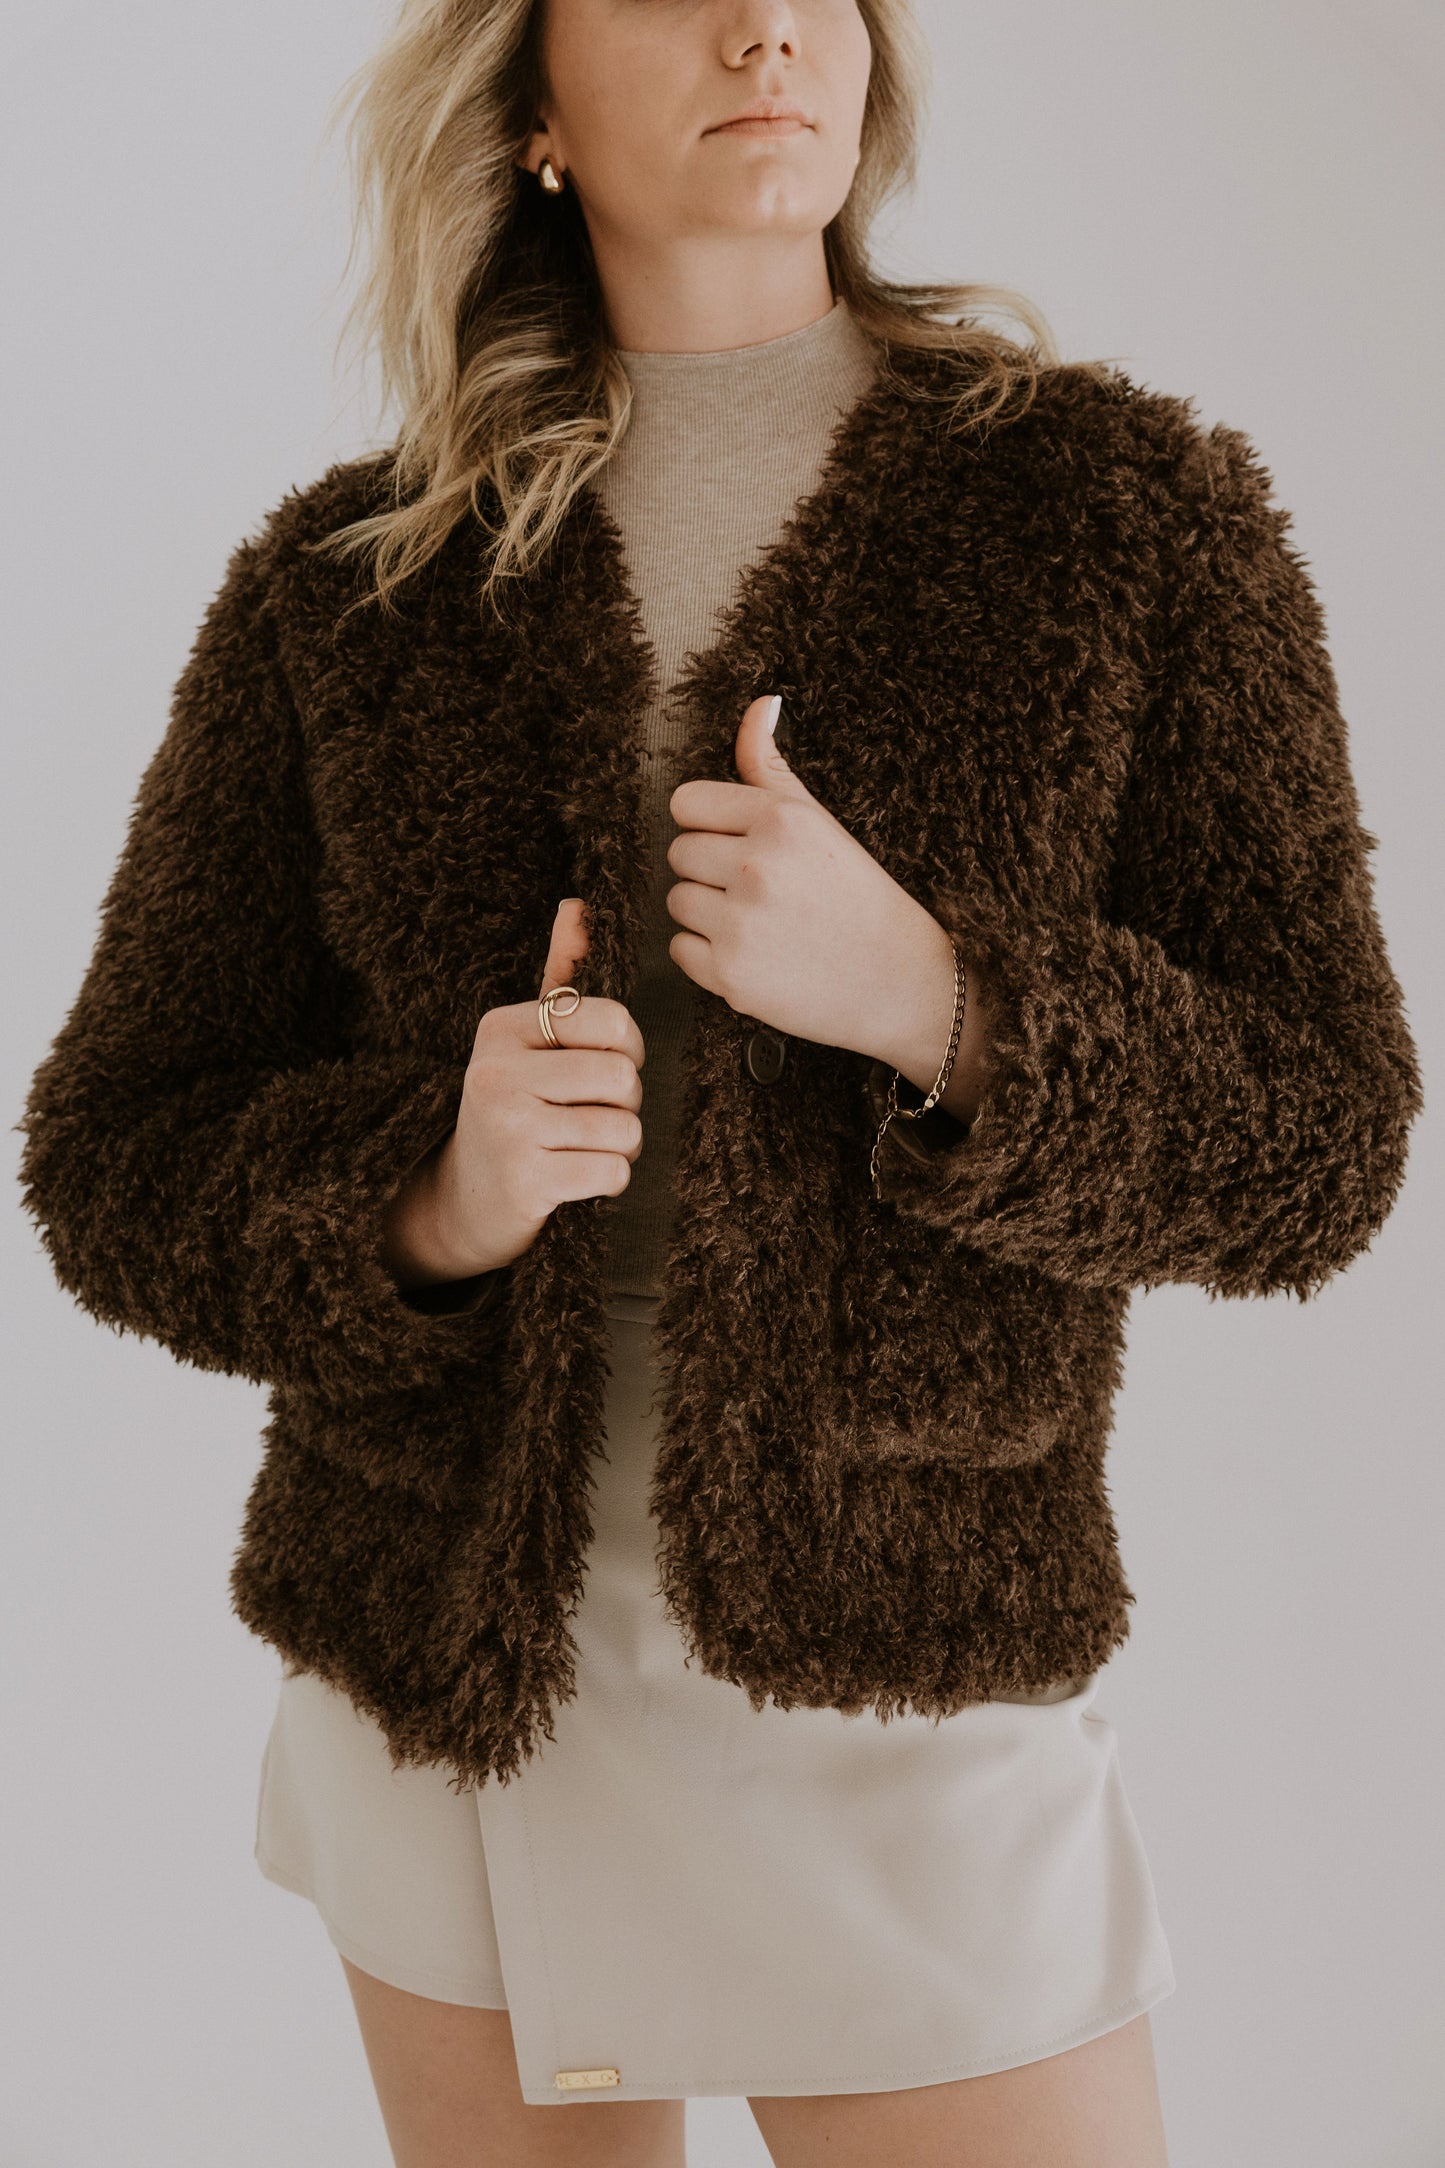 Fluffy Chocolate brown coat